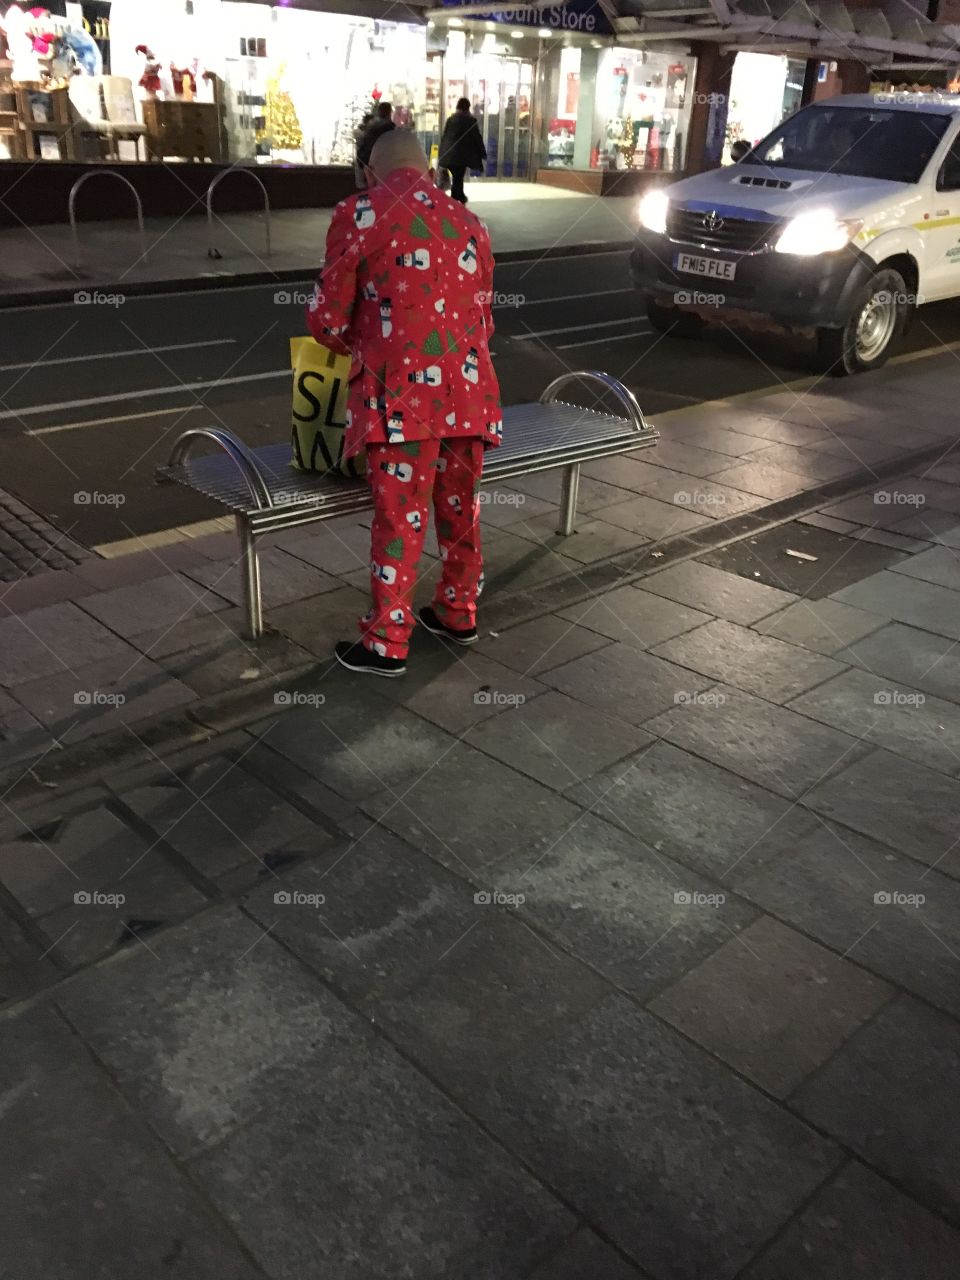 An early suit on my travels, with a Xmas surprise.